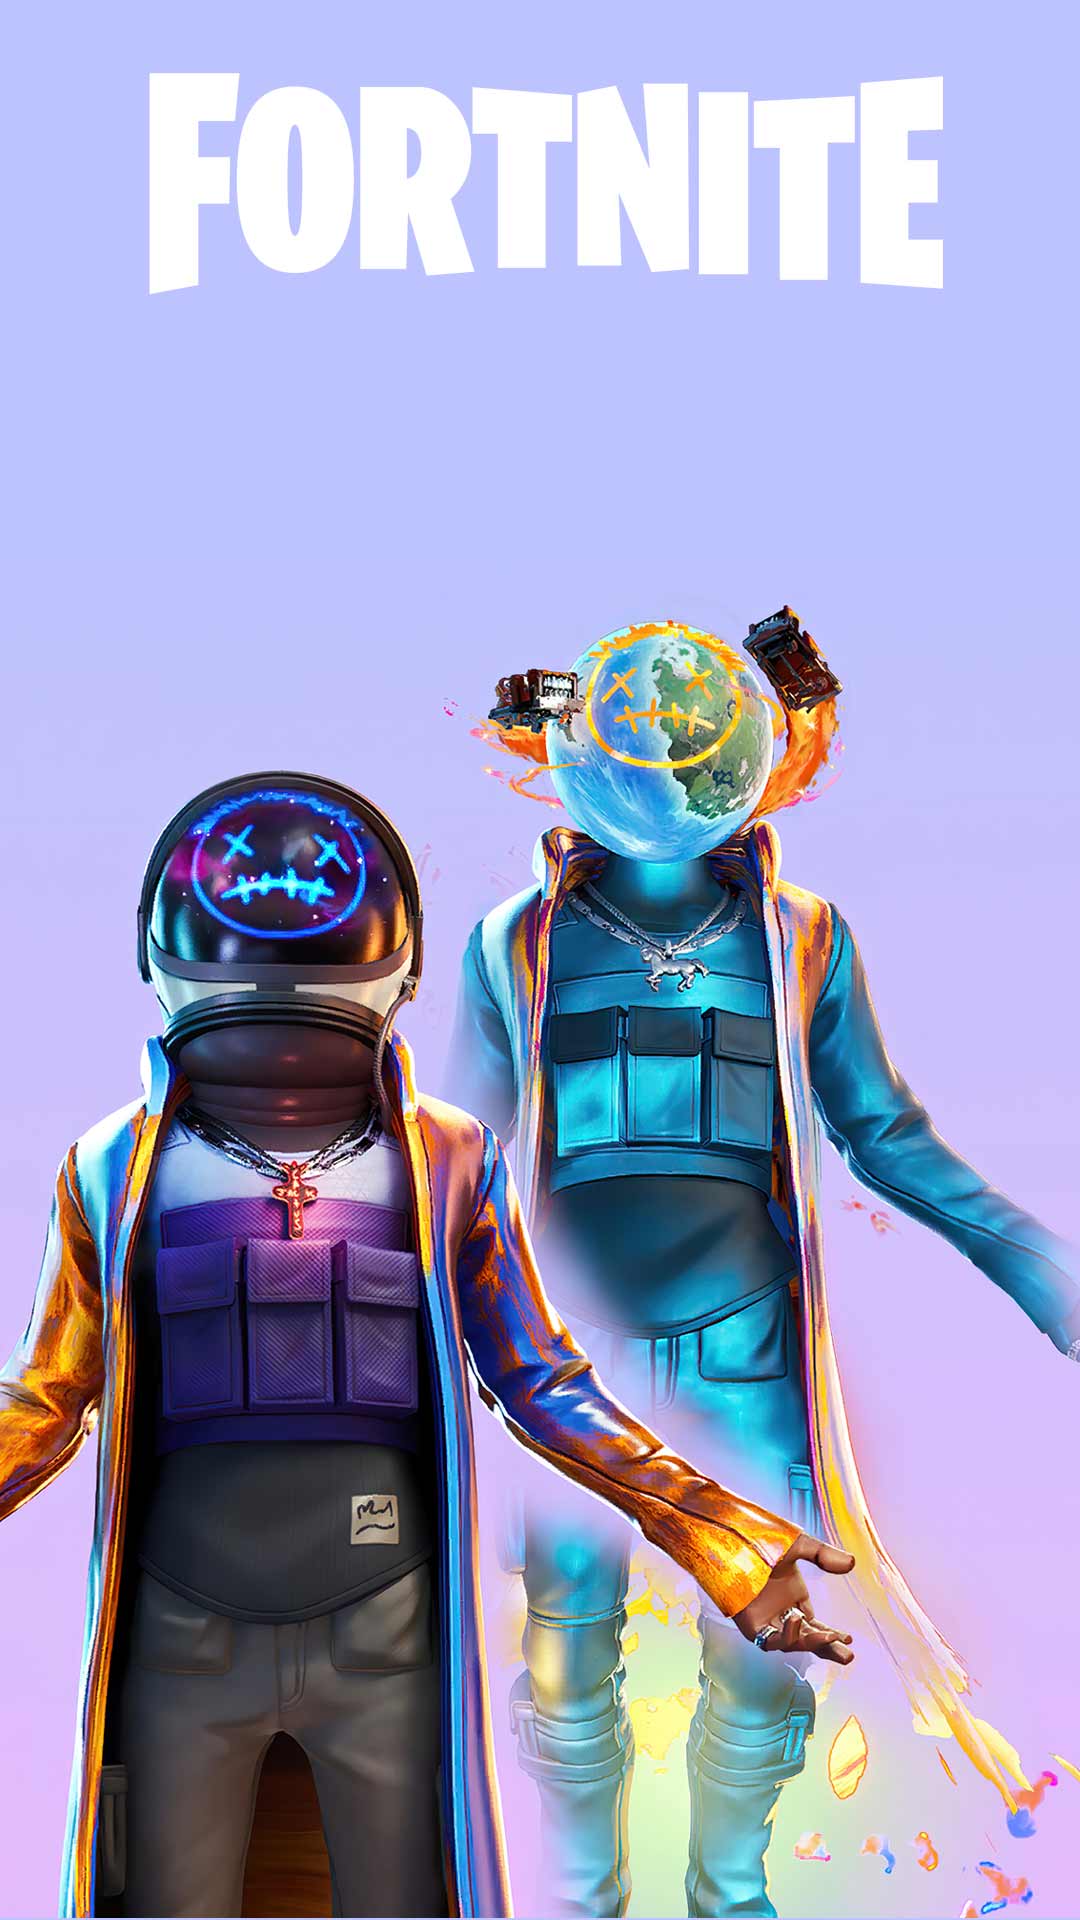 Astro jack fortnite wallpaper phone background for free download